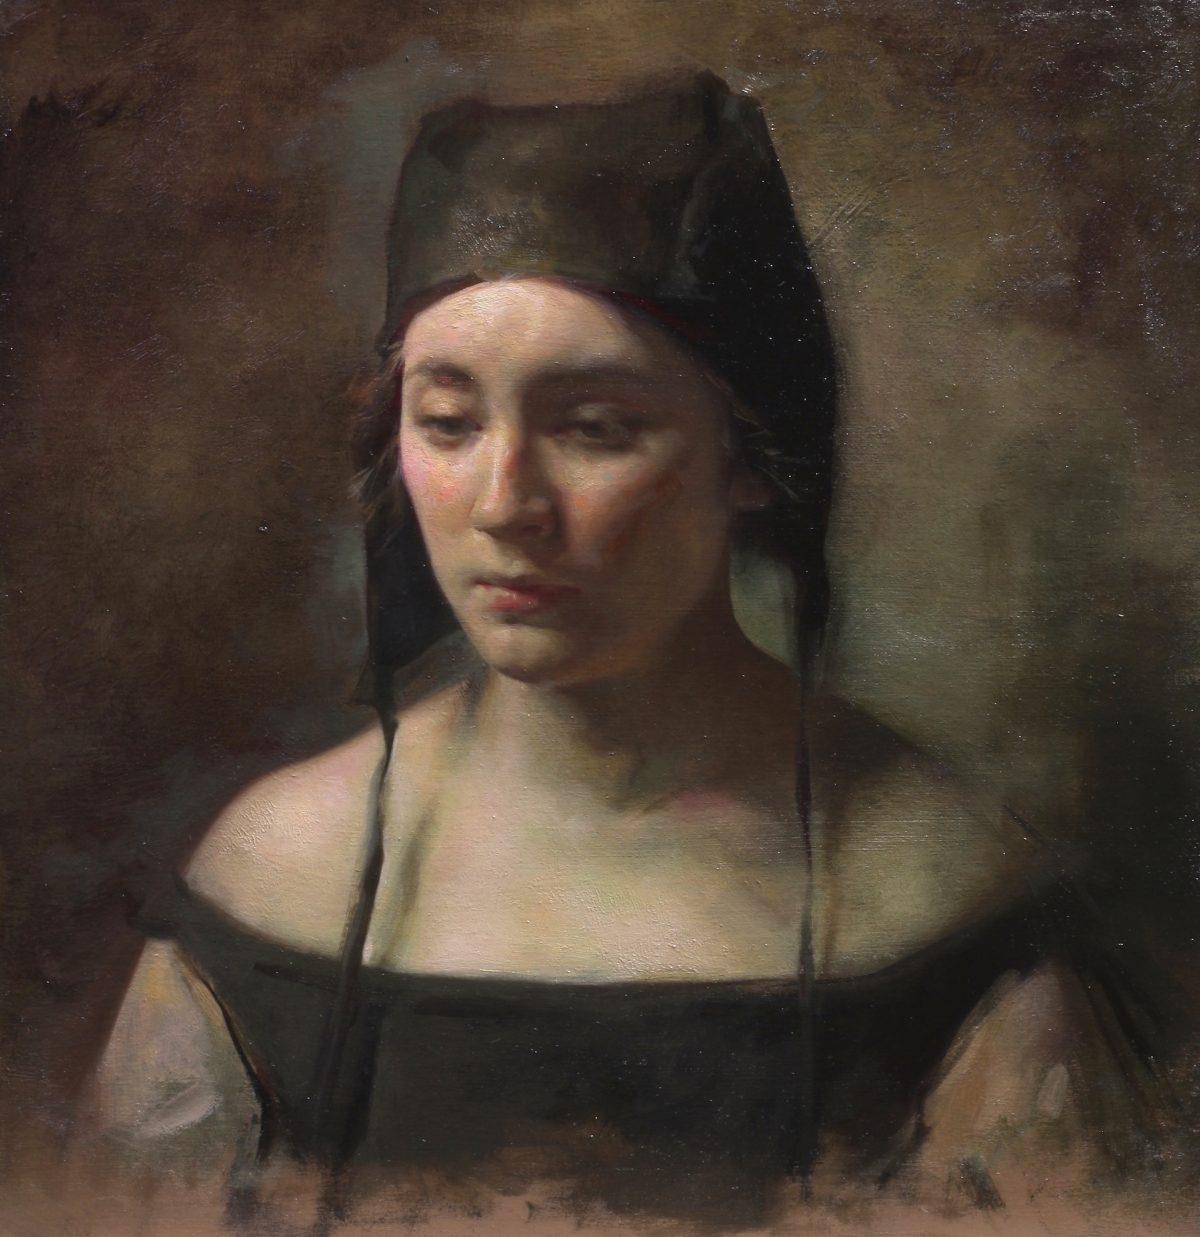 "Black Hat," 2018, by Colleen Barry (b. 1981). Oil on wood panel, 12 inches by 12 inches. (Robert Simon Fine Art)